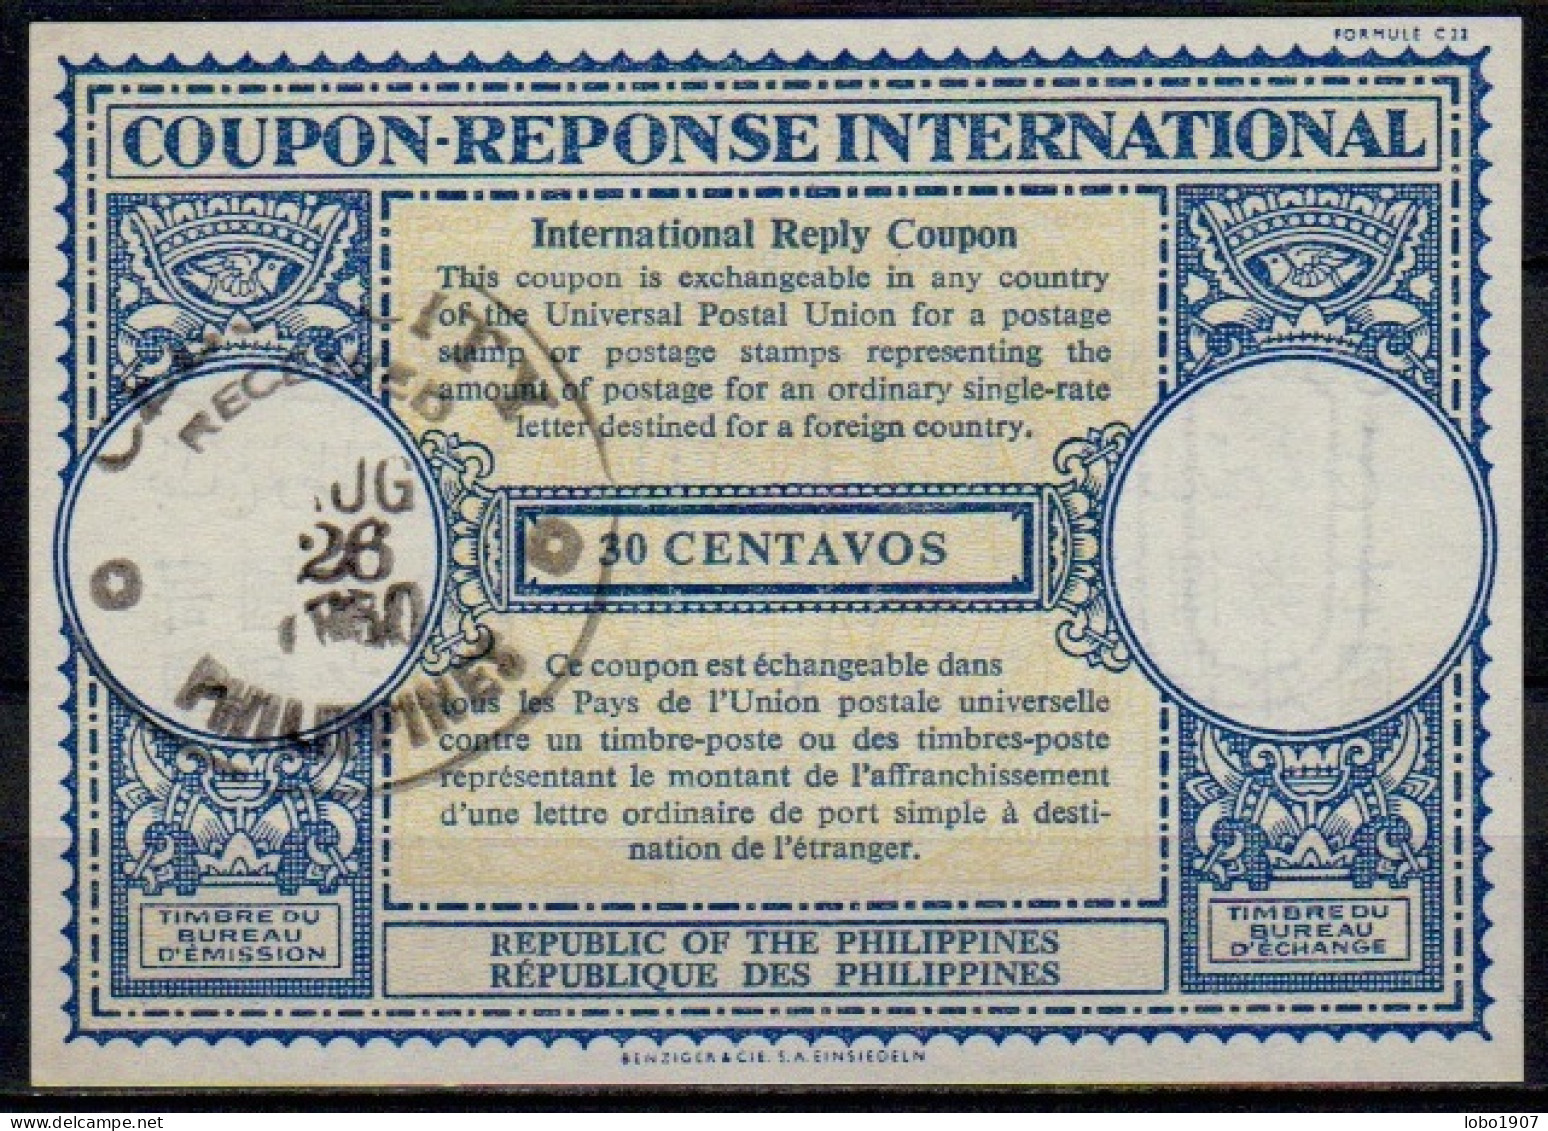 PHILIPPINES  Collection 15 International Reply Coupon Reponse Cupon Respuesta IRC IAS See List And Scans - Philippines